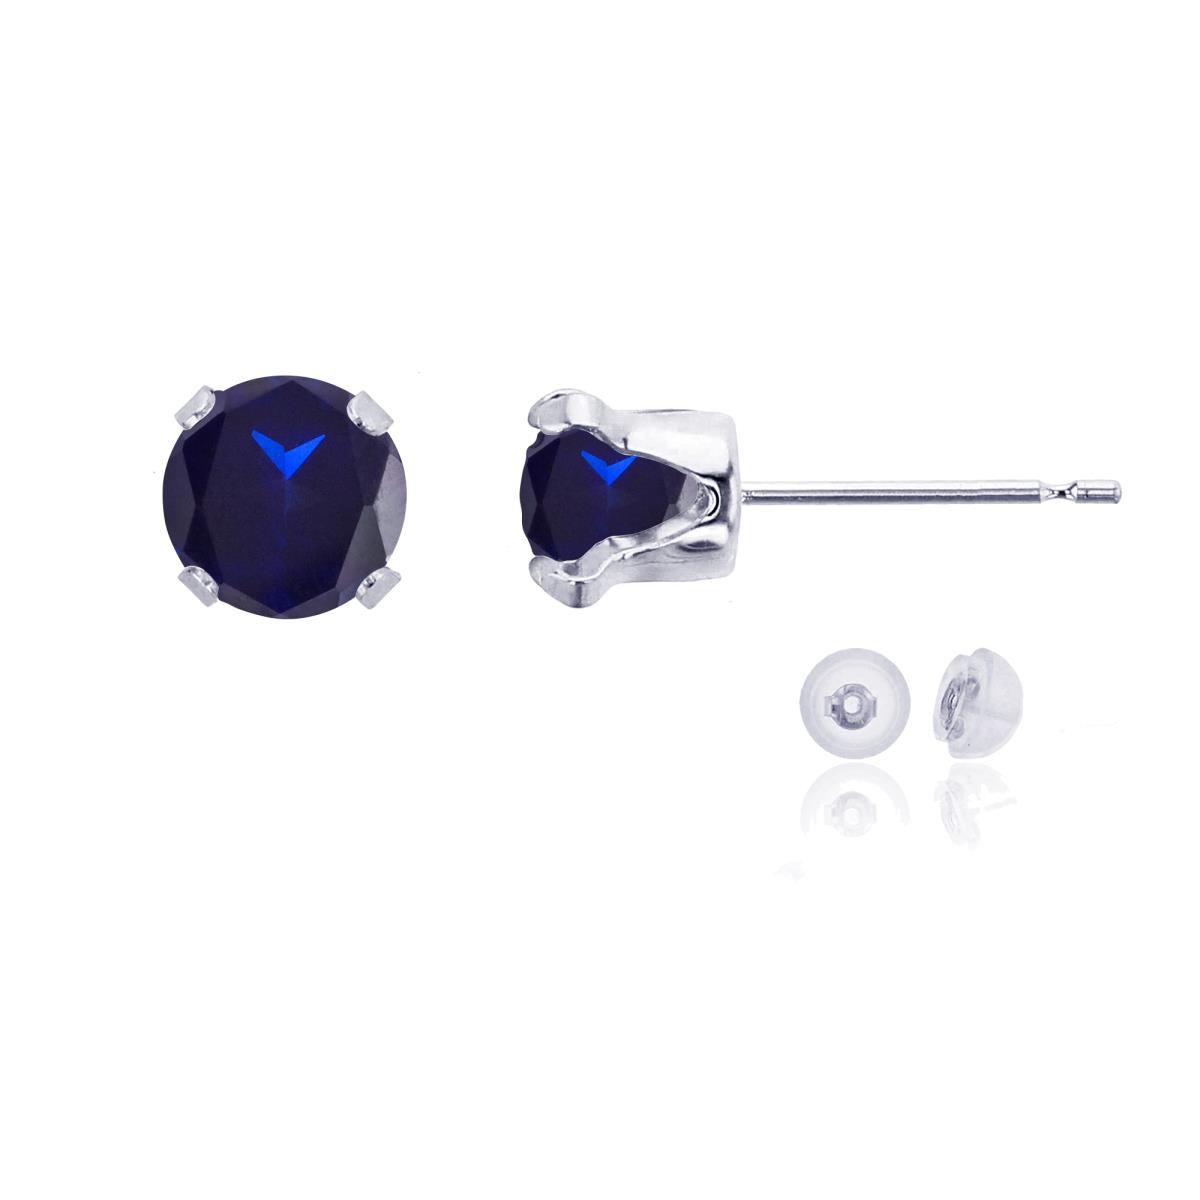 10K White Gold 6mm Round Cr Blue Sapphire Stud Earring with Silicone Back